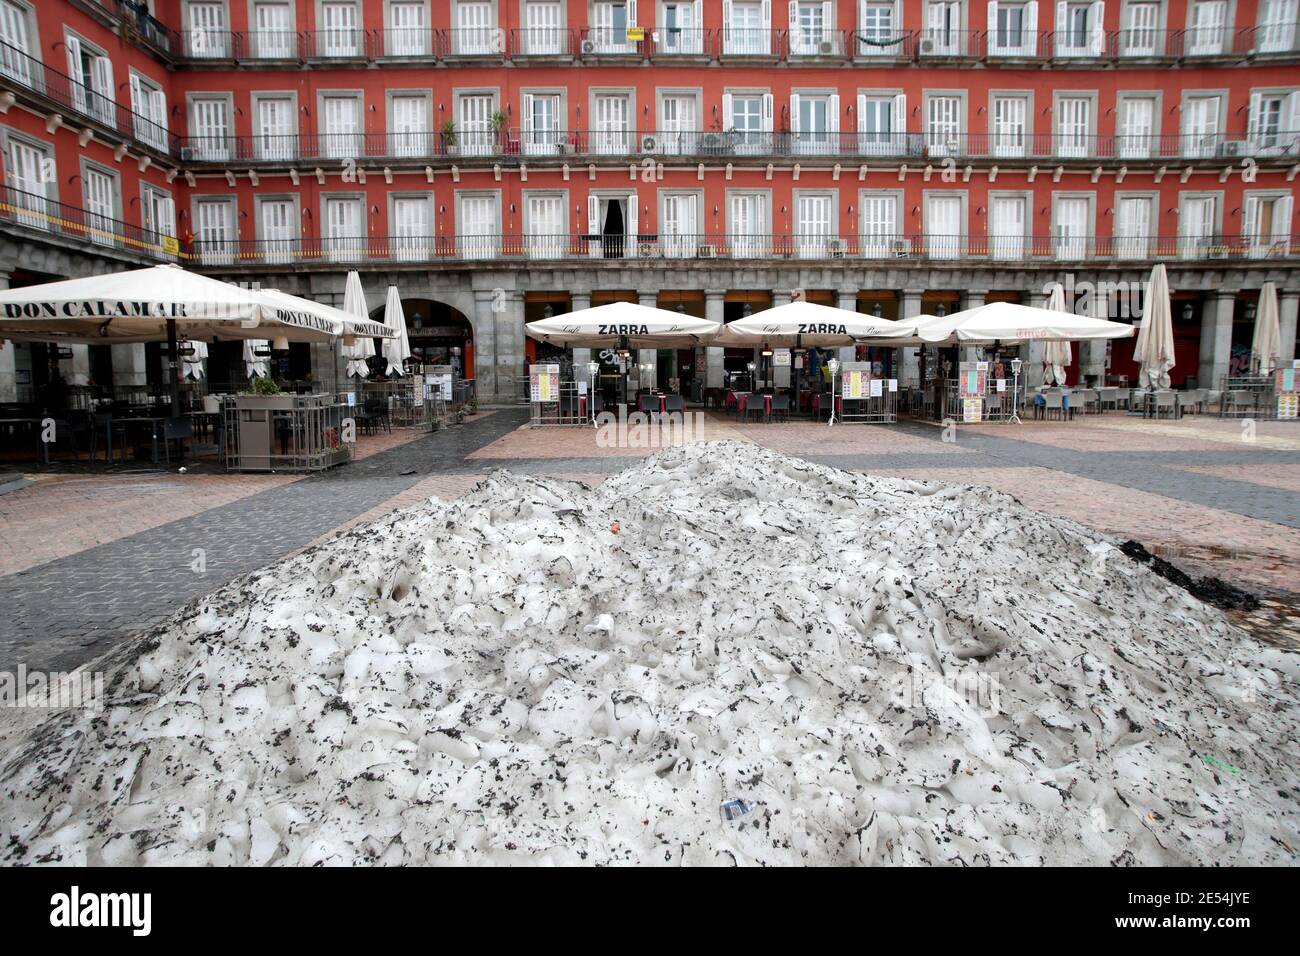 Madrid, Spain; 26/01/2021.- Plaza Mayor.The center of Madrid at noon while the third wave of the coronavirus is taking Spain to the worst moment of the pandemic. Hospital saturation, the increase in cases, deaths from Covid-19 continue to increase day by day. Meanwhile, the government has published the latest provisional mortality data in Spain, 262,373 deaths during the first half of last year, the highest mortality since 1941. Photo: Juan Carlos Rojas/Picture Alliance | usage worldwide Stock Photo